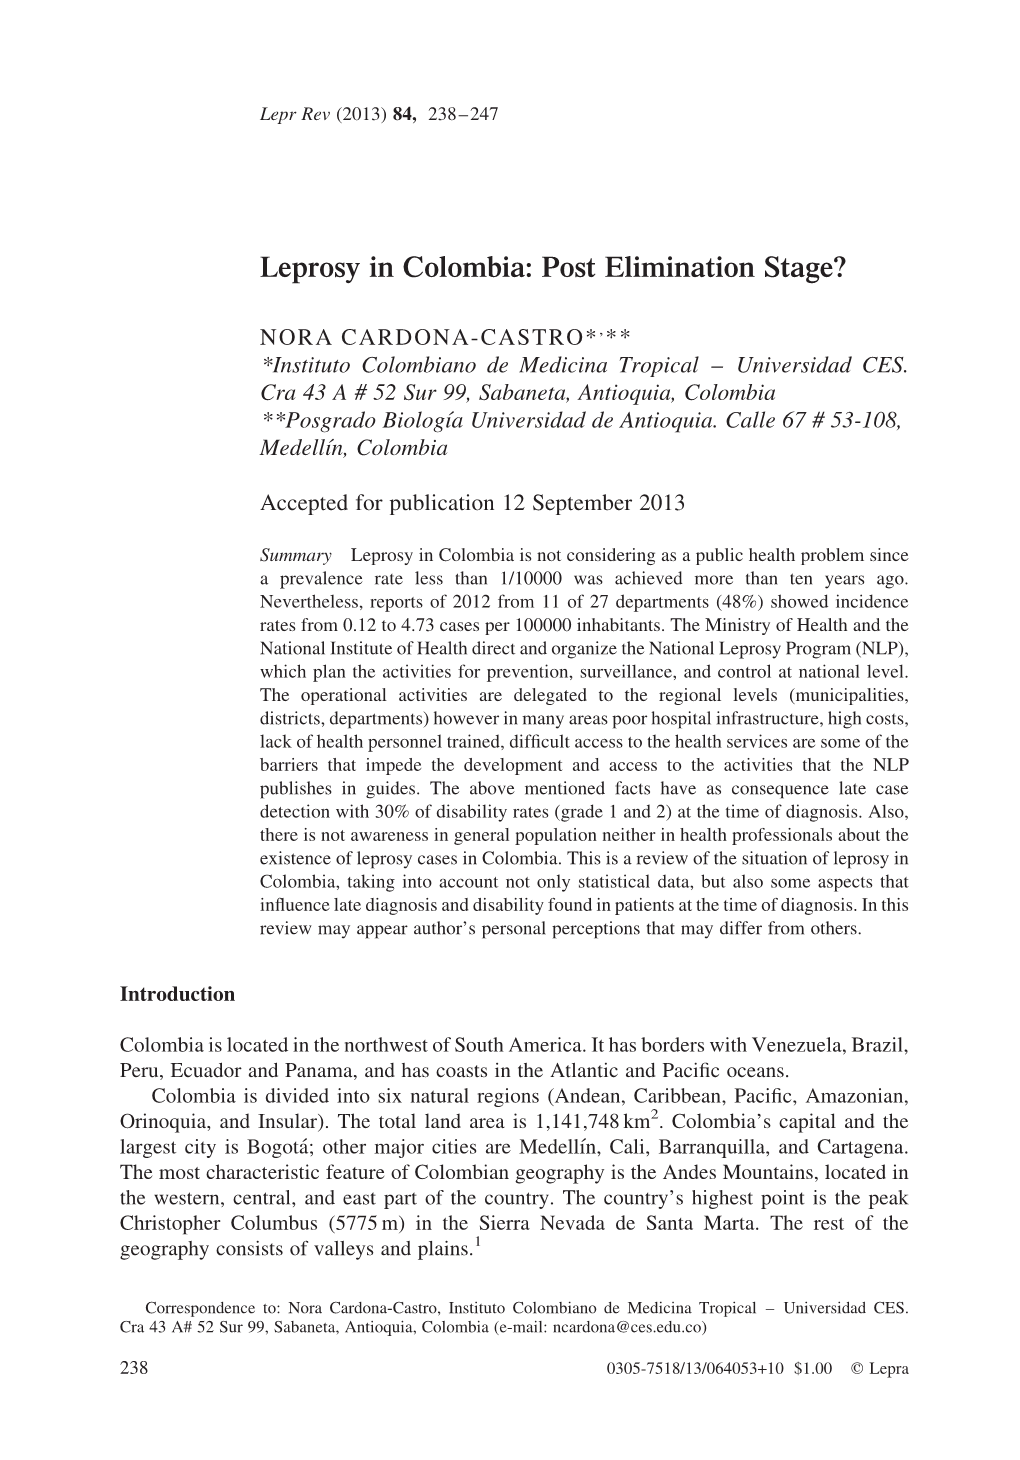 Leprosy in Colombia: Post Elimination Stage?